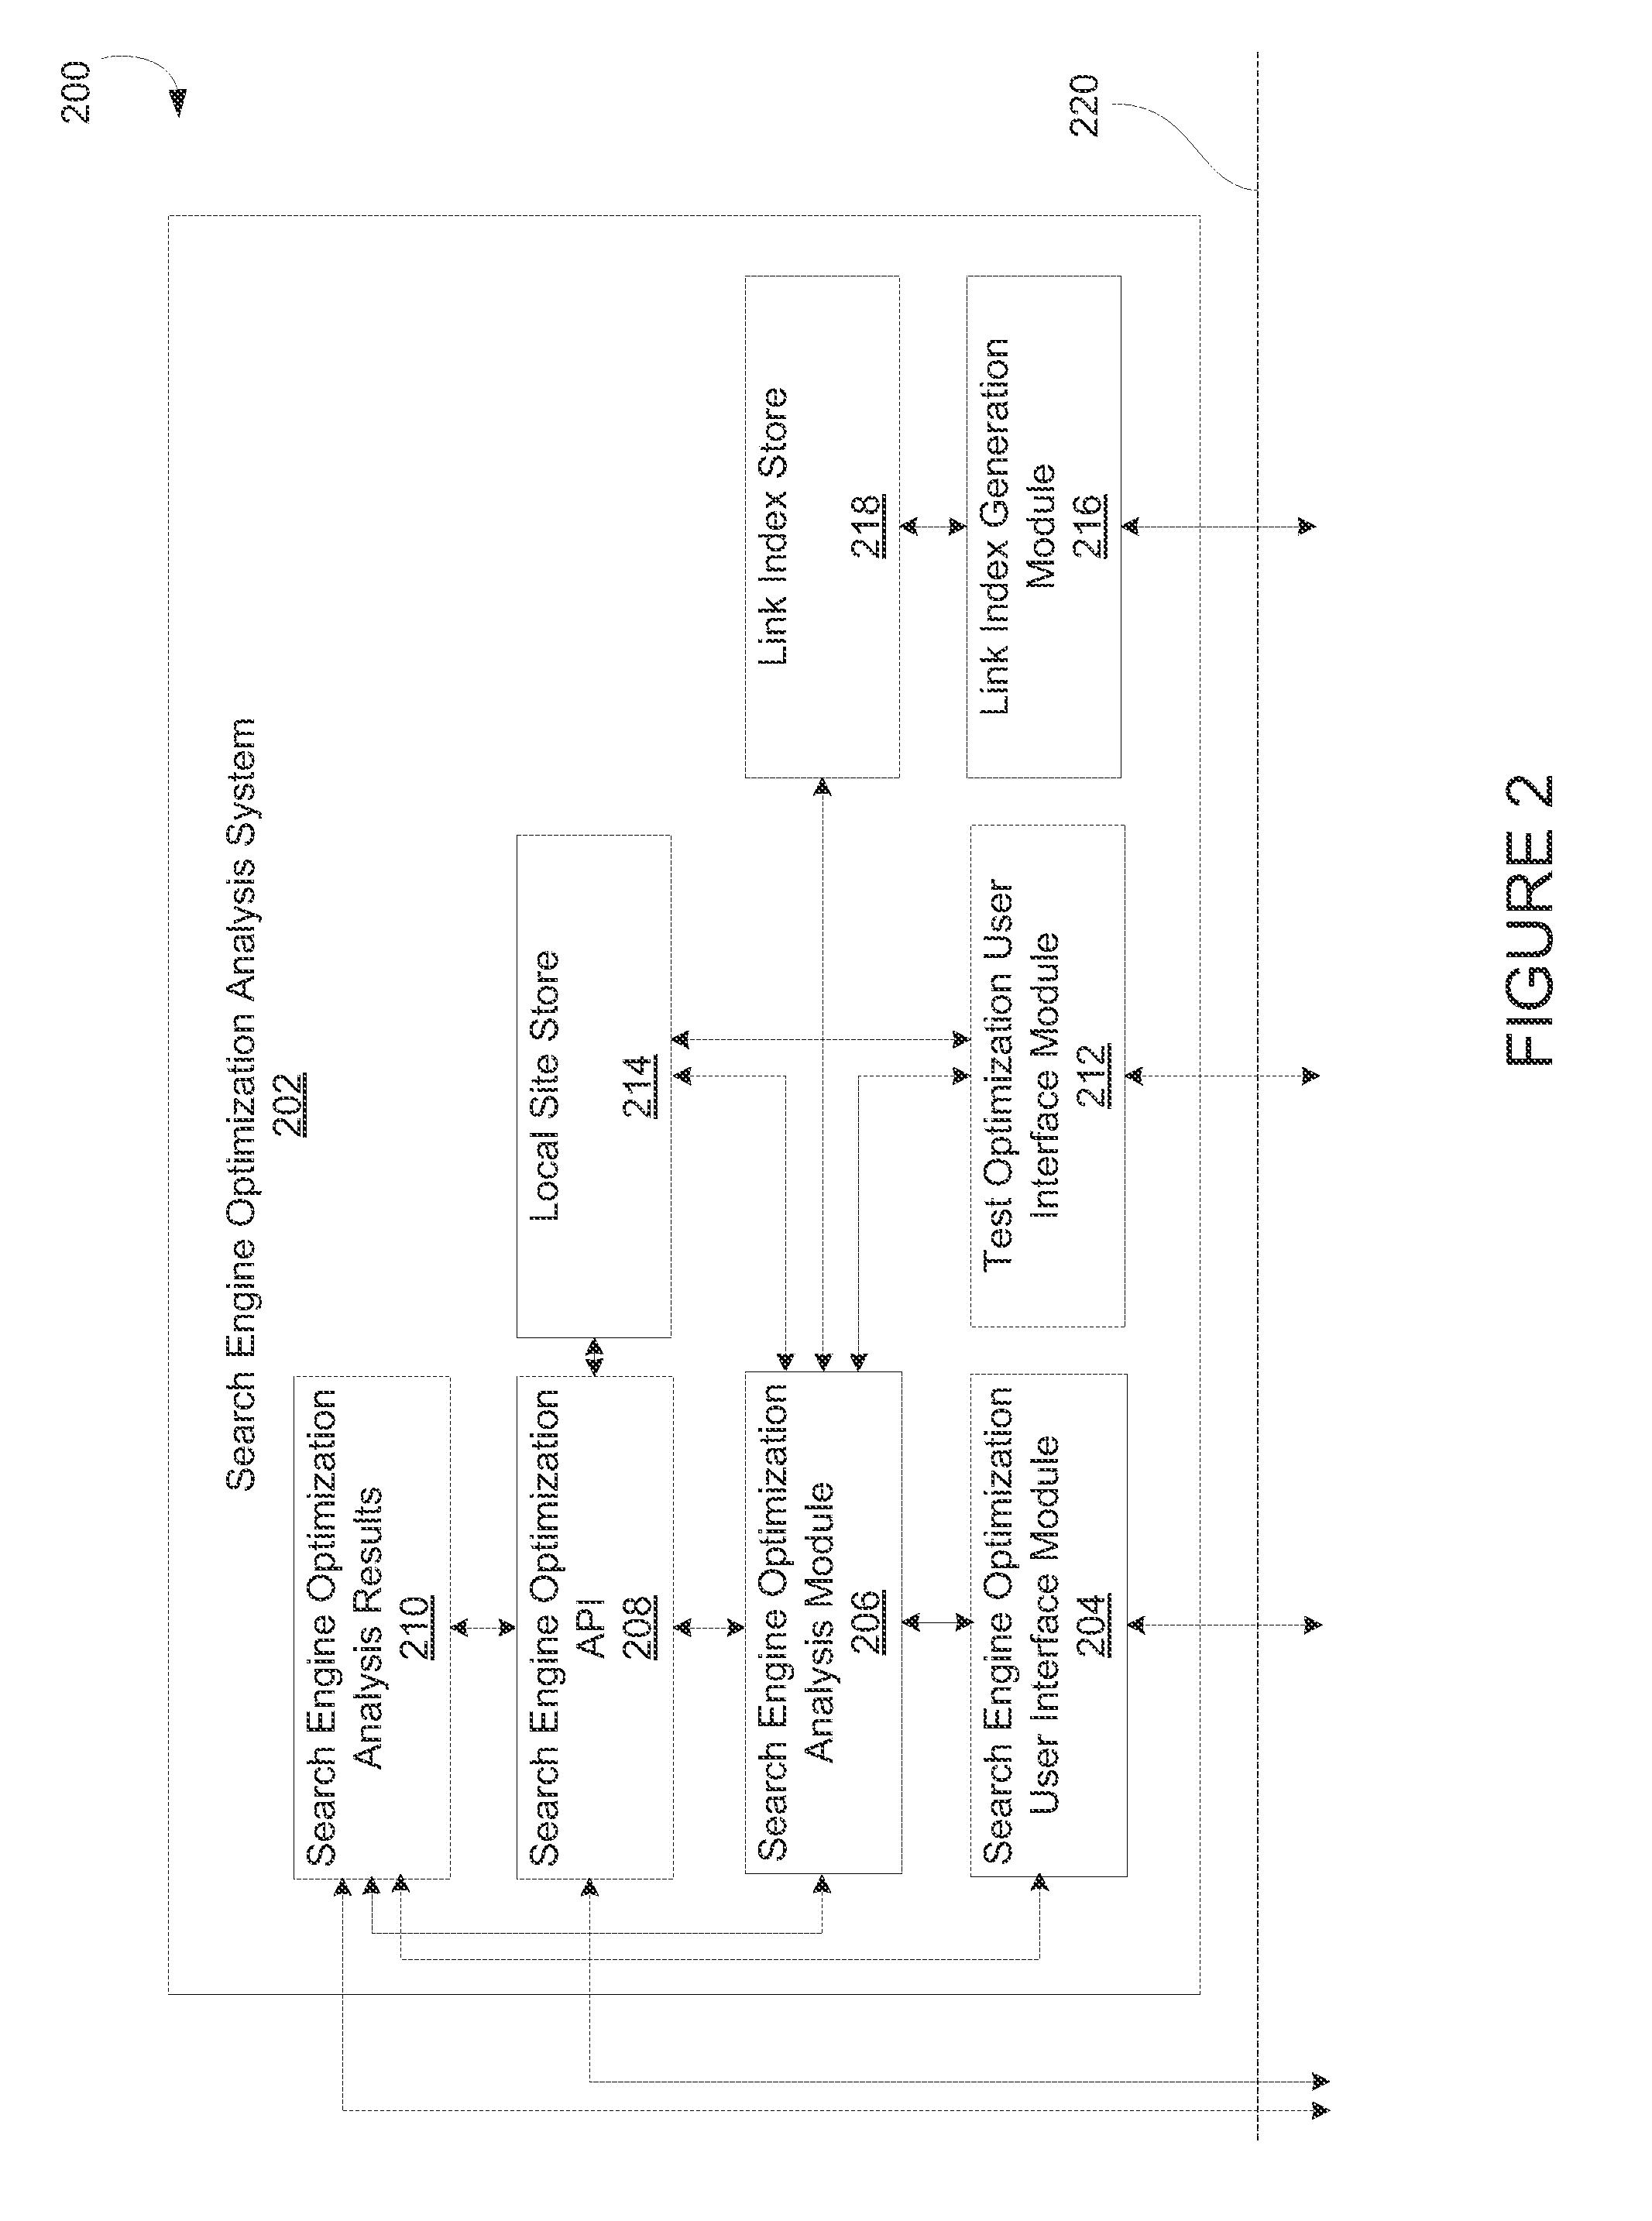 System and method for providing search engine optimization analysis